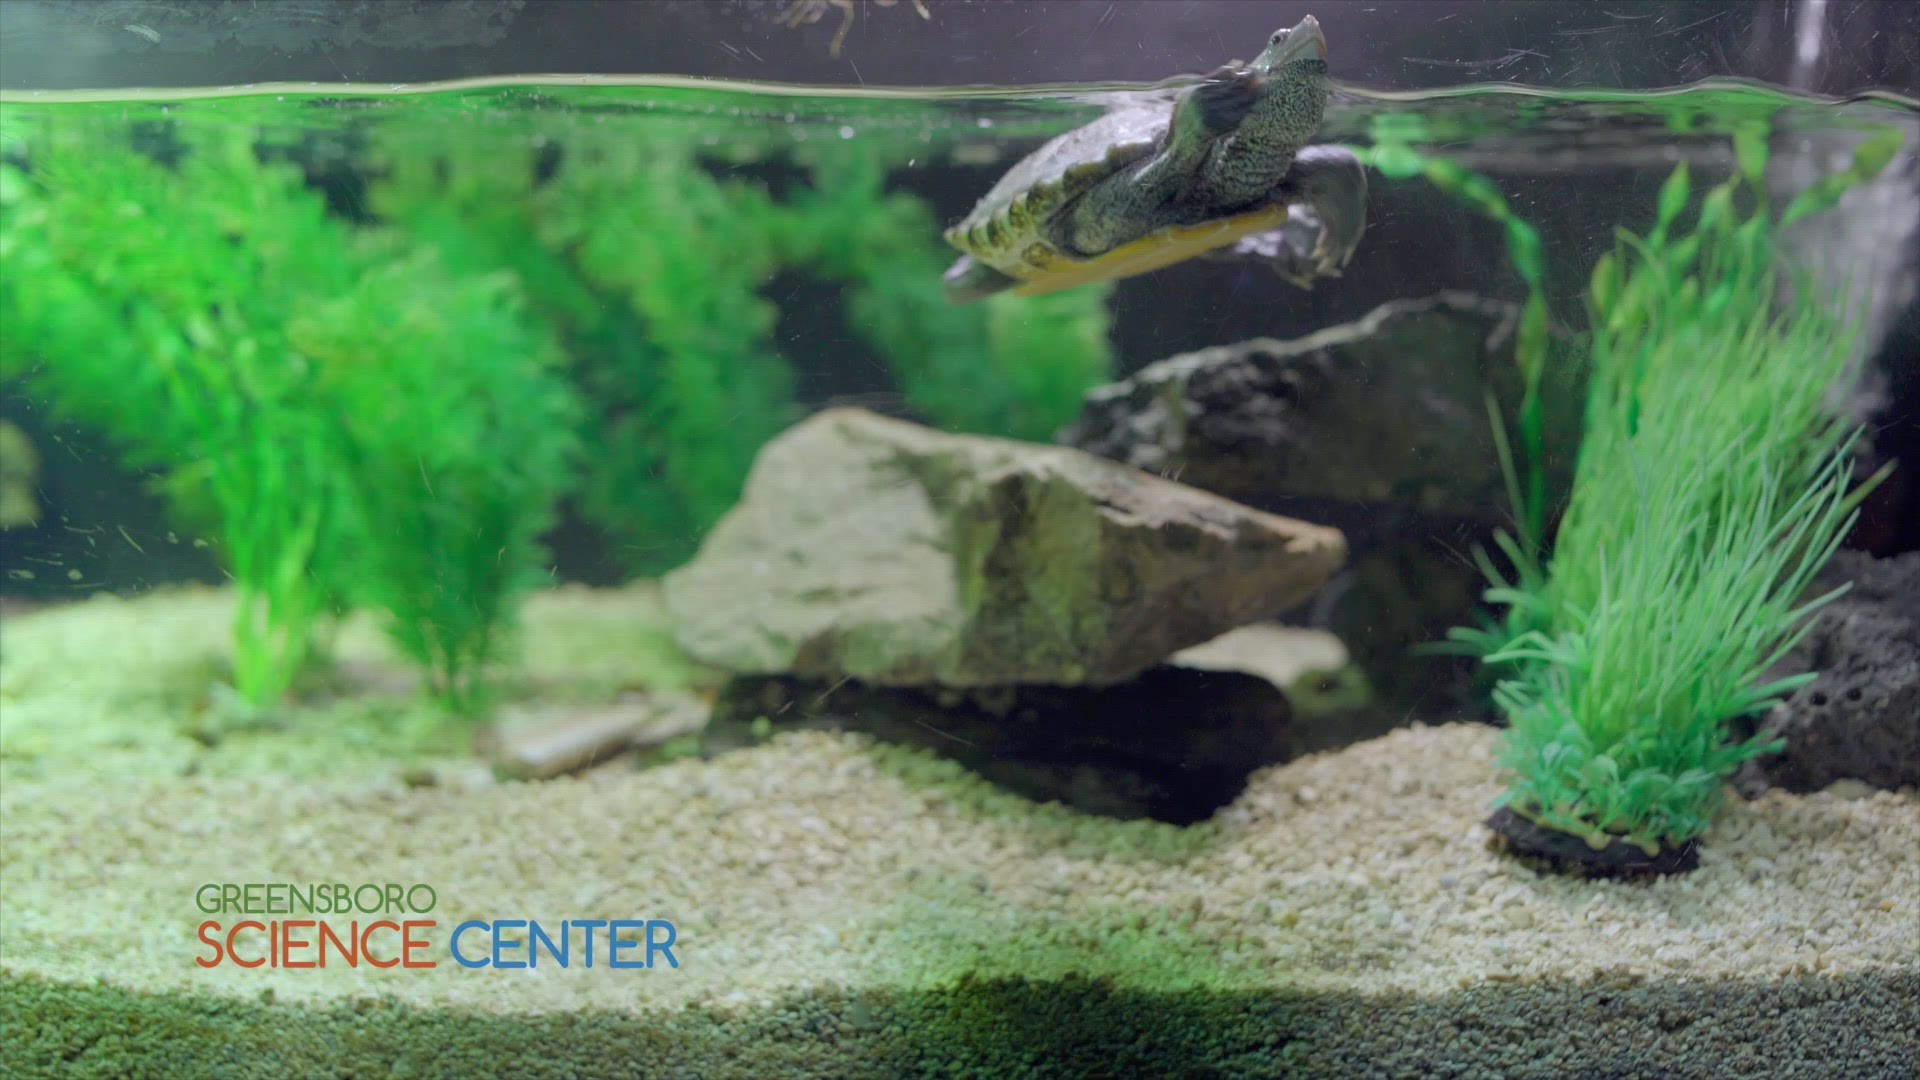 Check out this swimming turtle at the Greensboro Science Center.